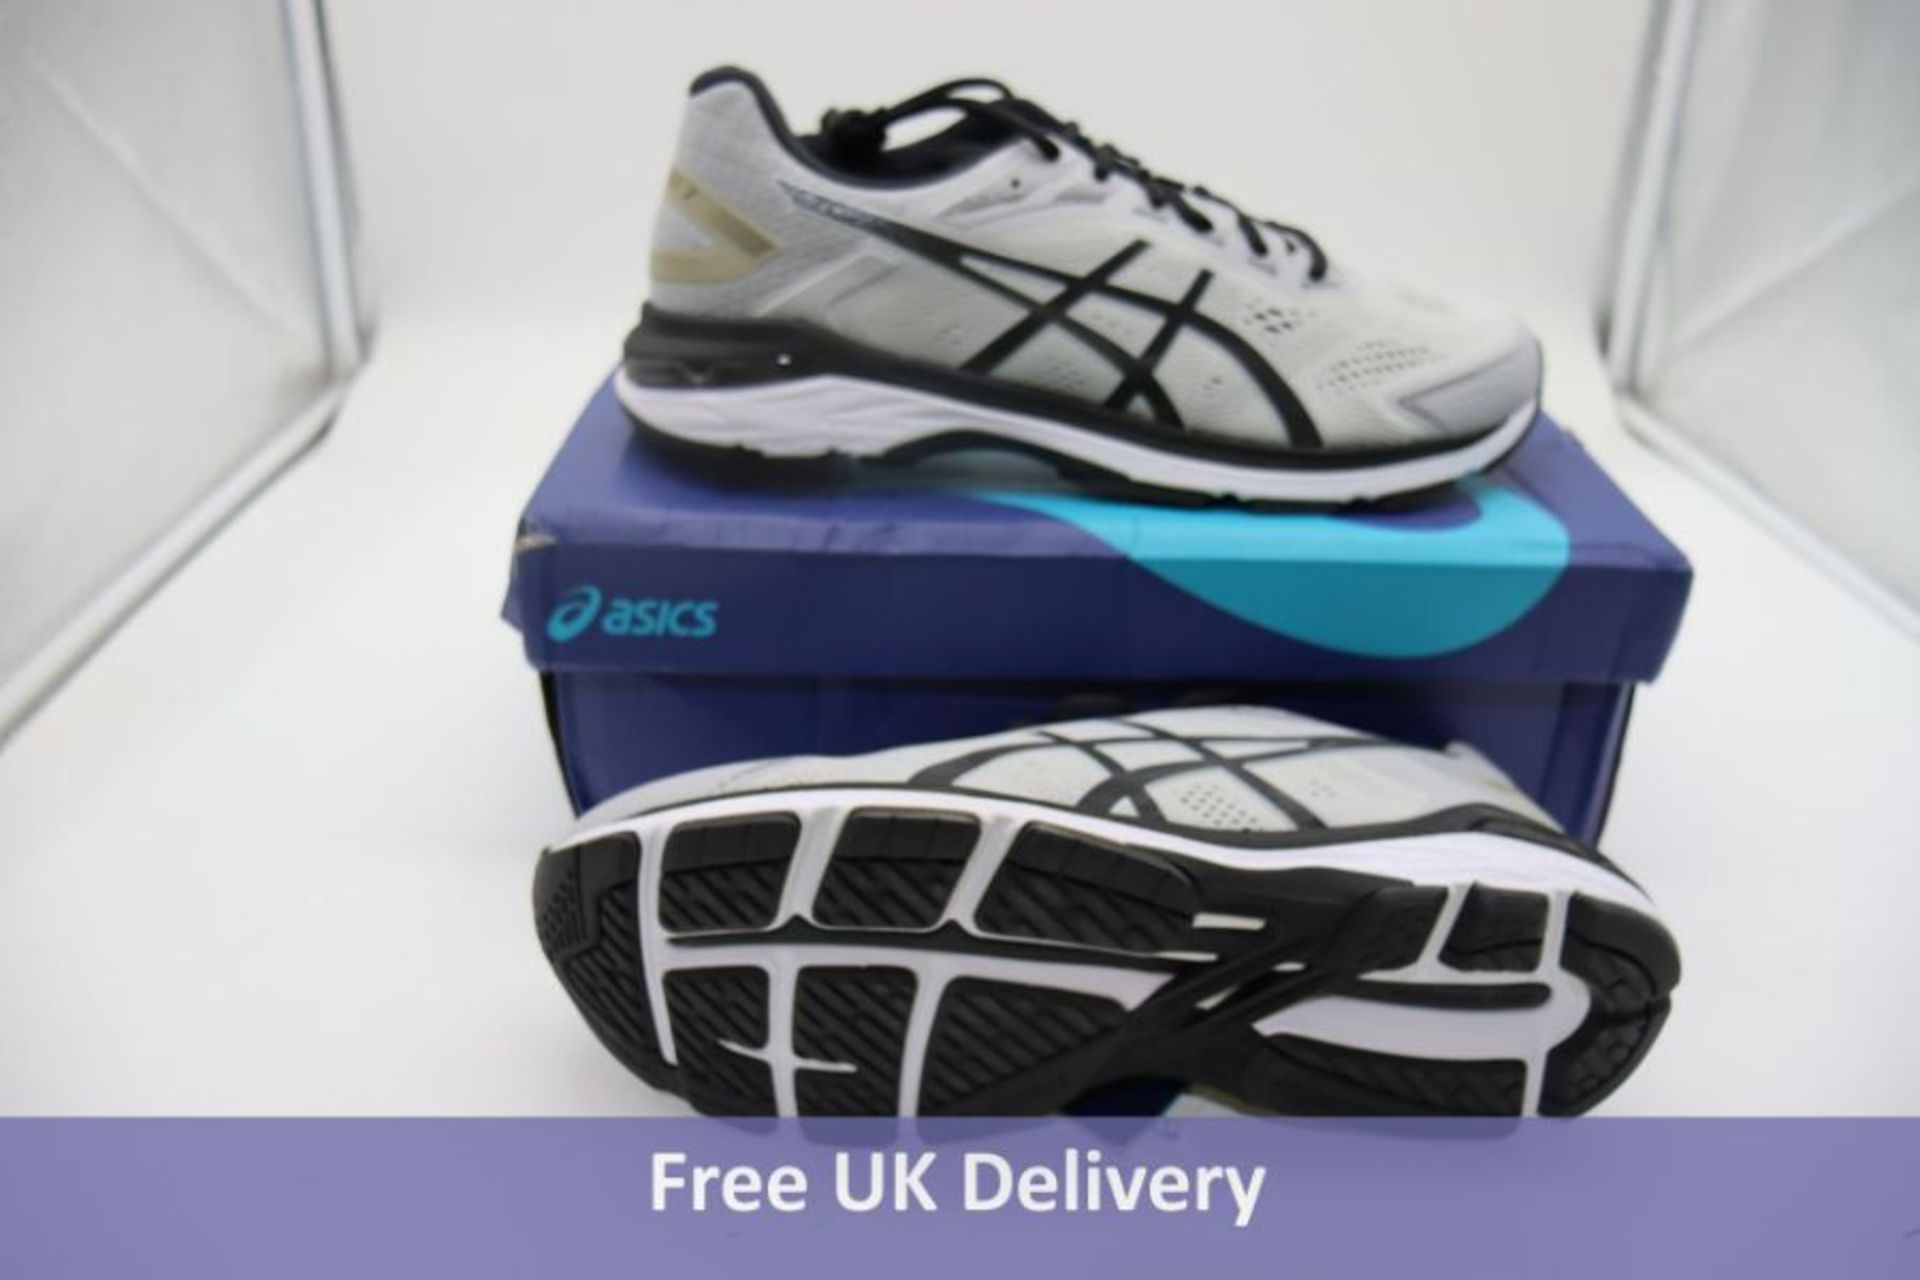 Asics Men's GT-2000 7 Trainers, Mid Grey And Black, UK 10